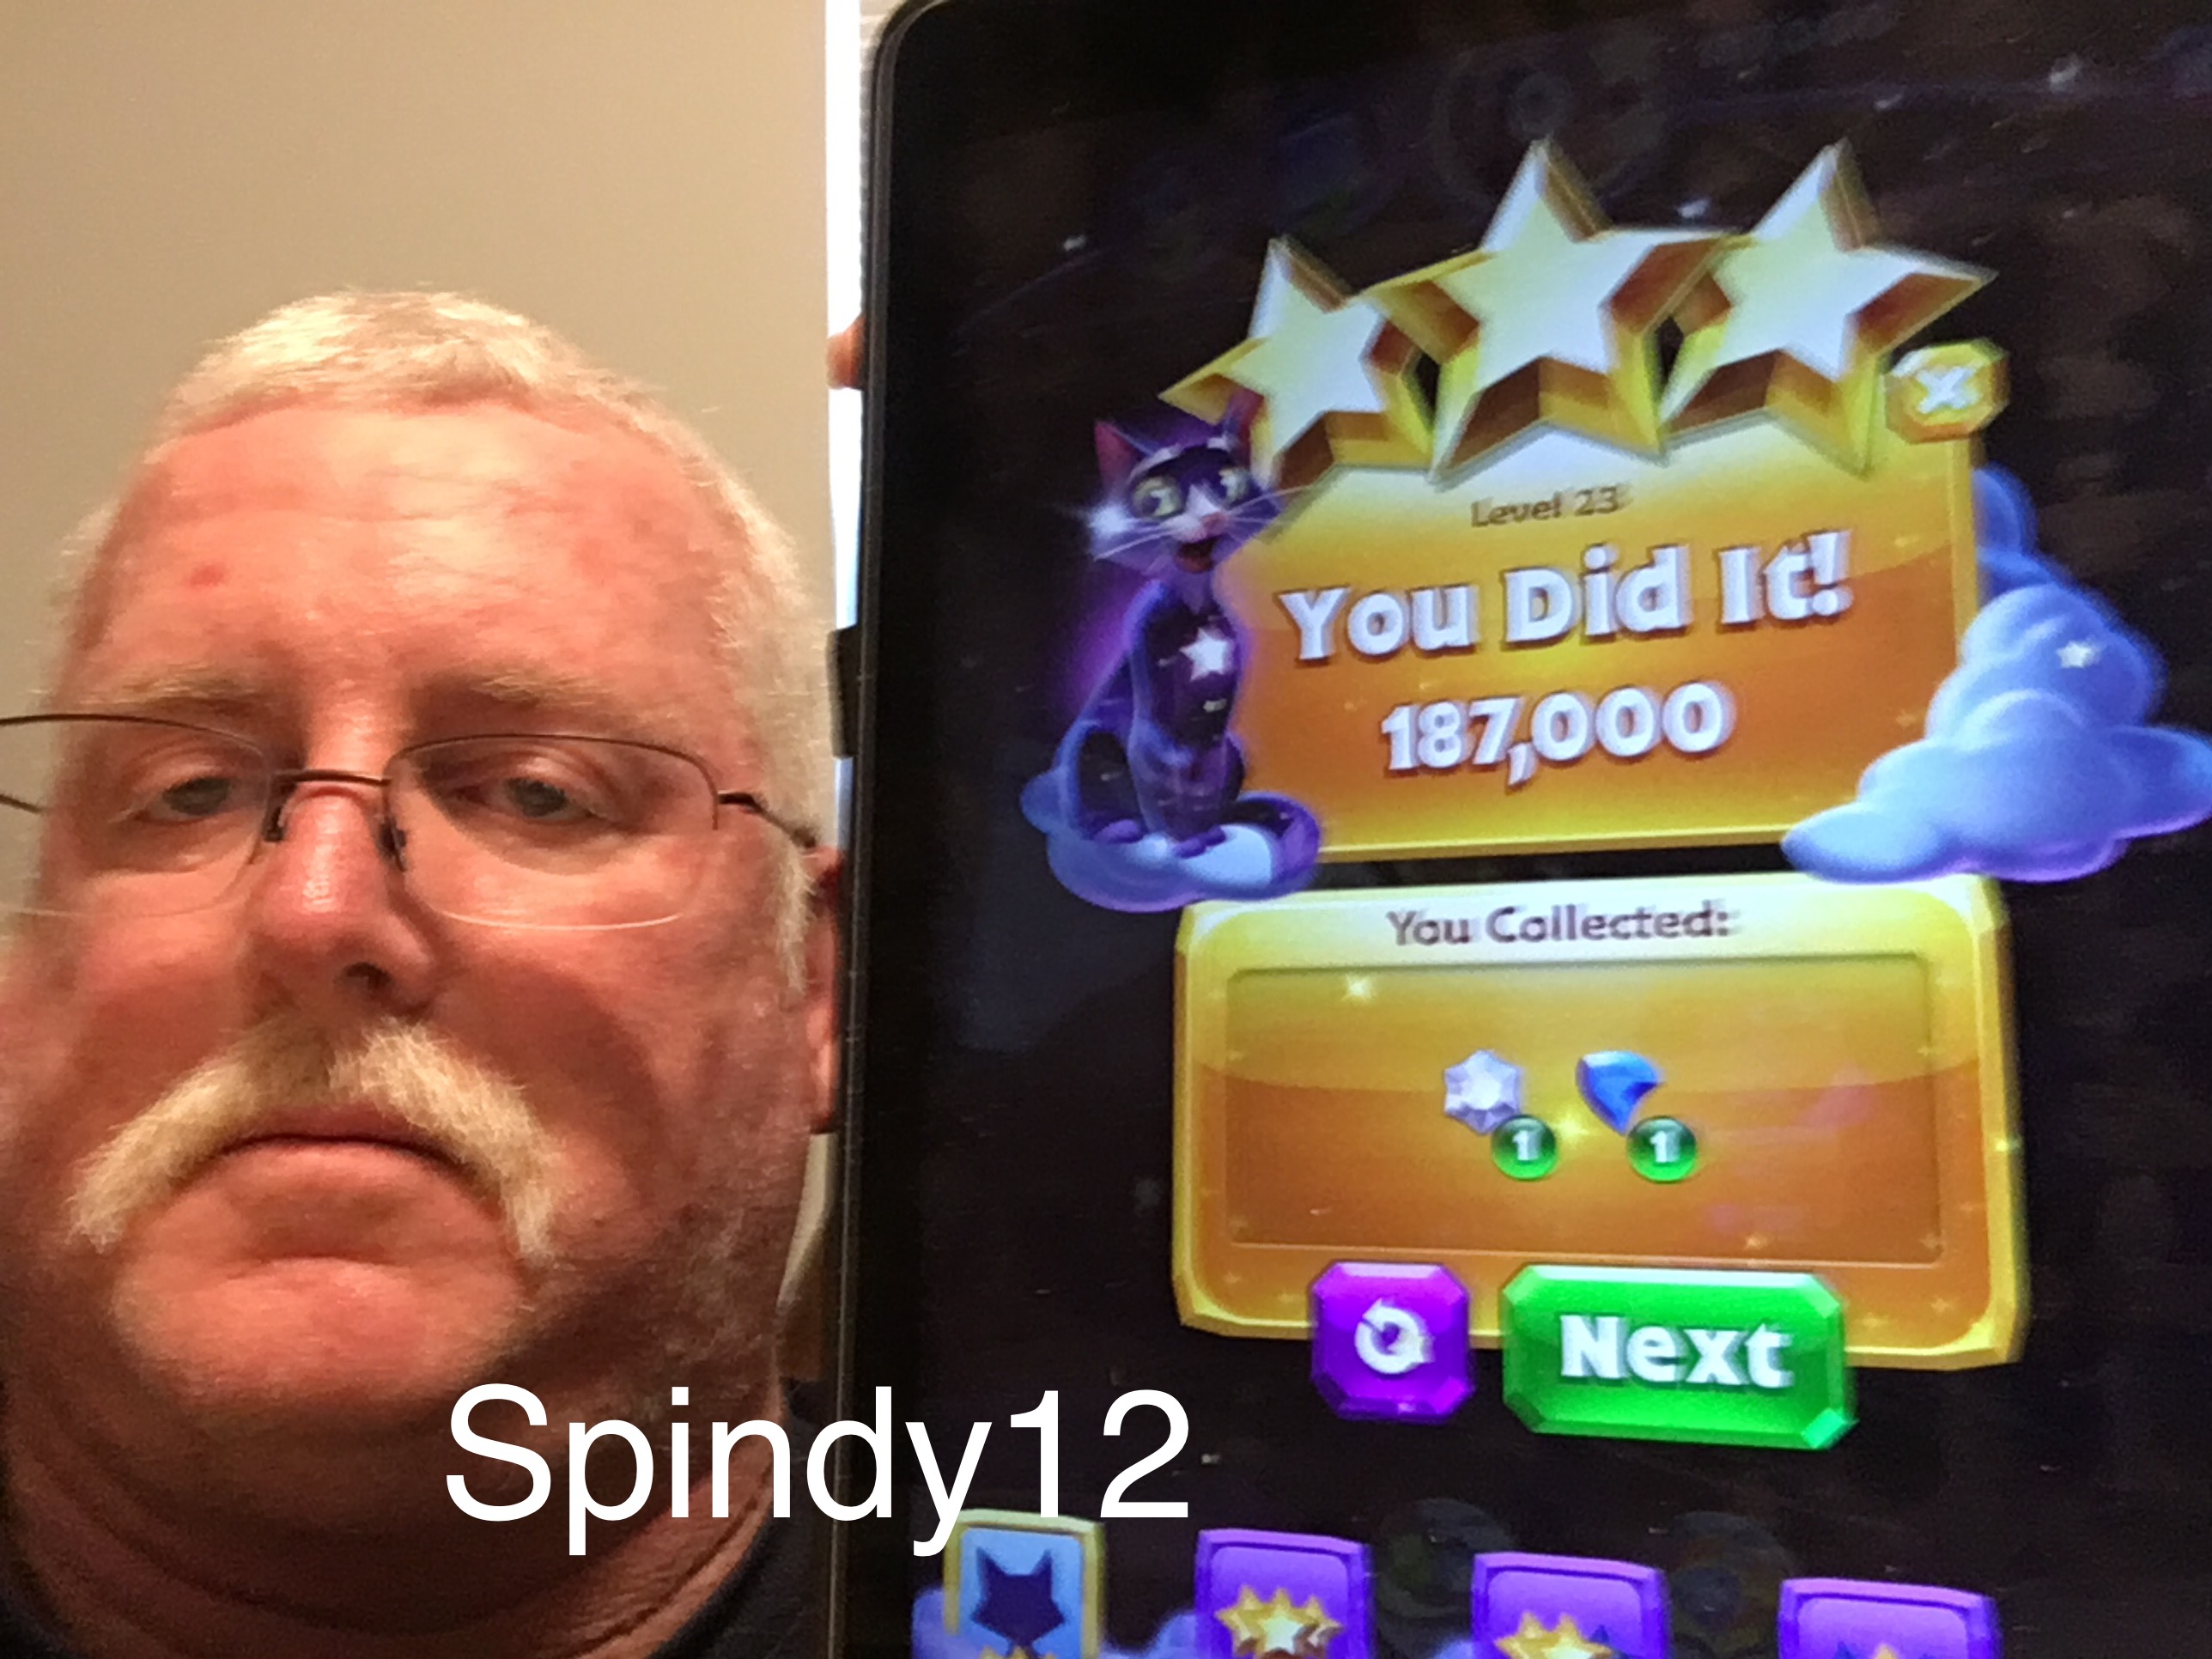 Spindy12: Bejeweled Stars: Level 23 - Time to Multitask Returns! (iOS) 187,000 points on 2016-12-25 08:05:02